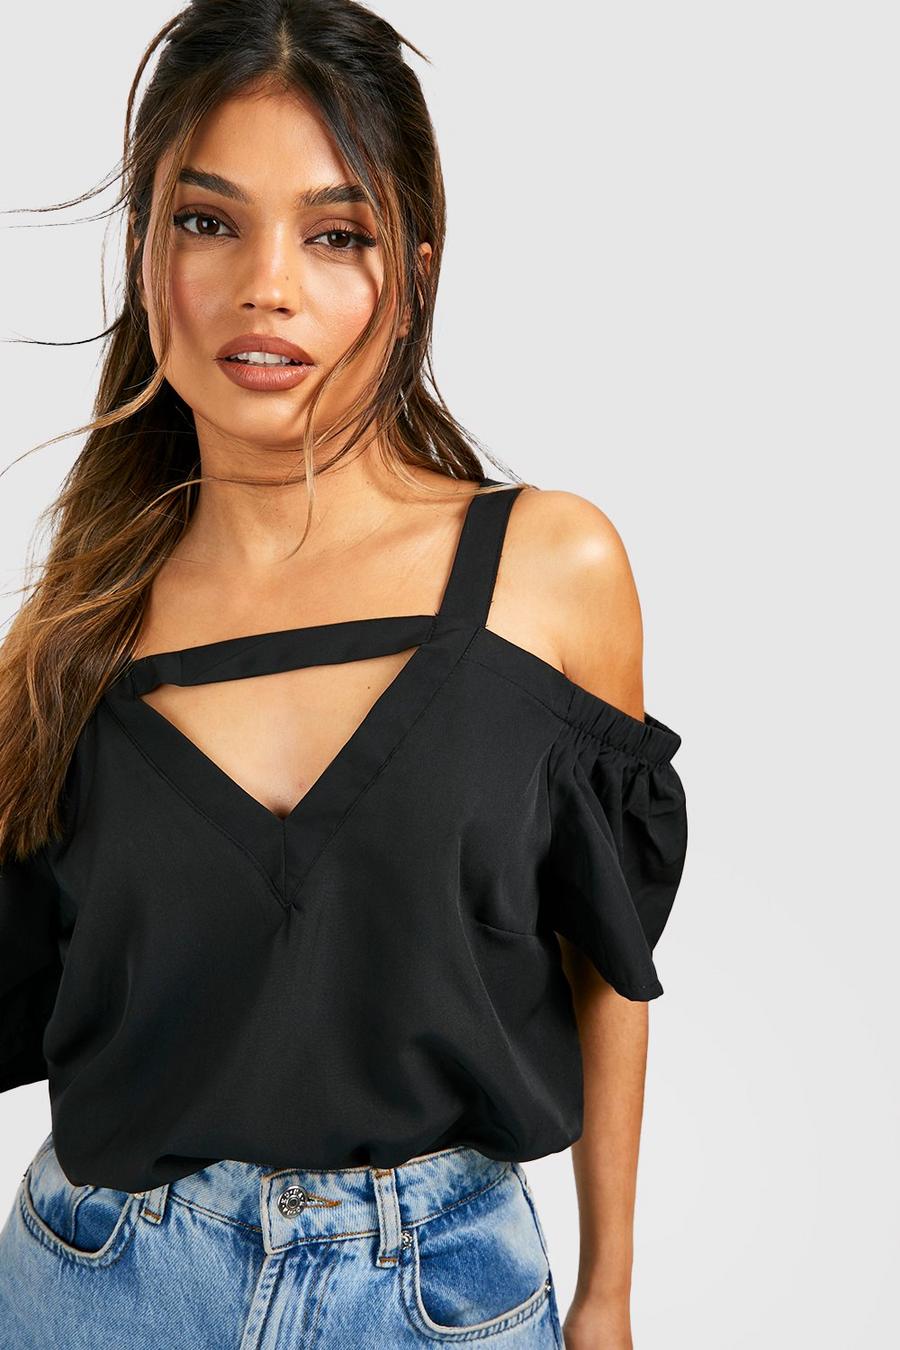 Mode Tops Cut-Out-Tops sch\u00f6nes Sommertop mit Cutouts 